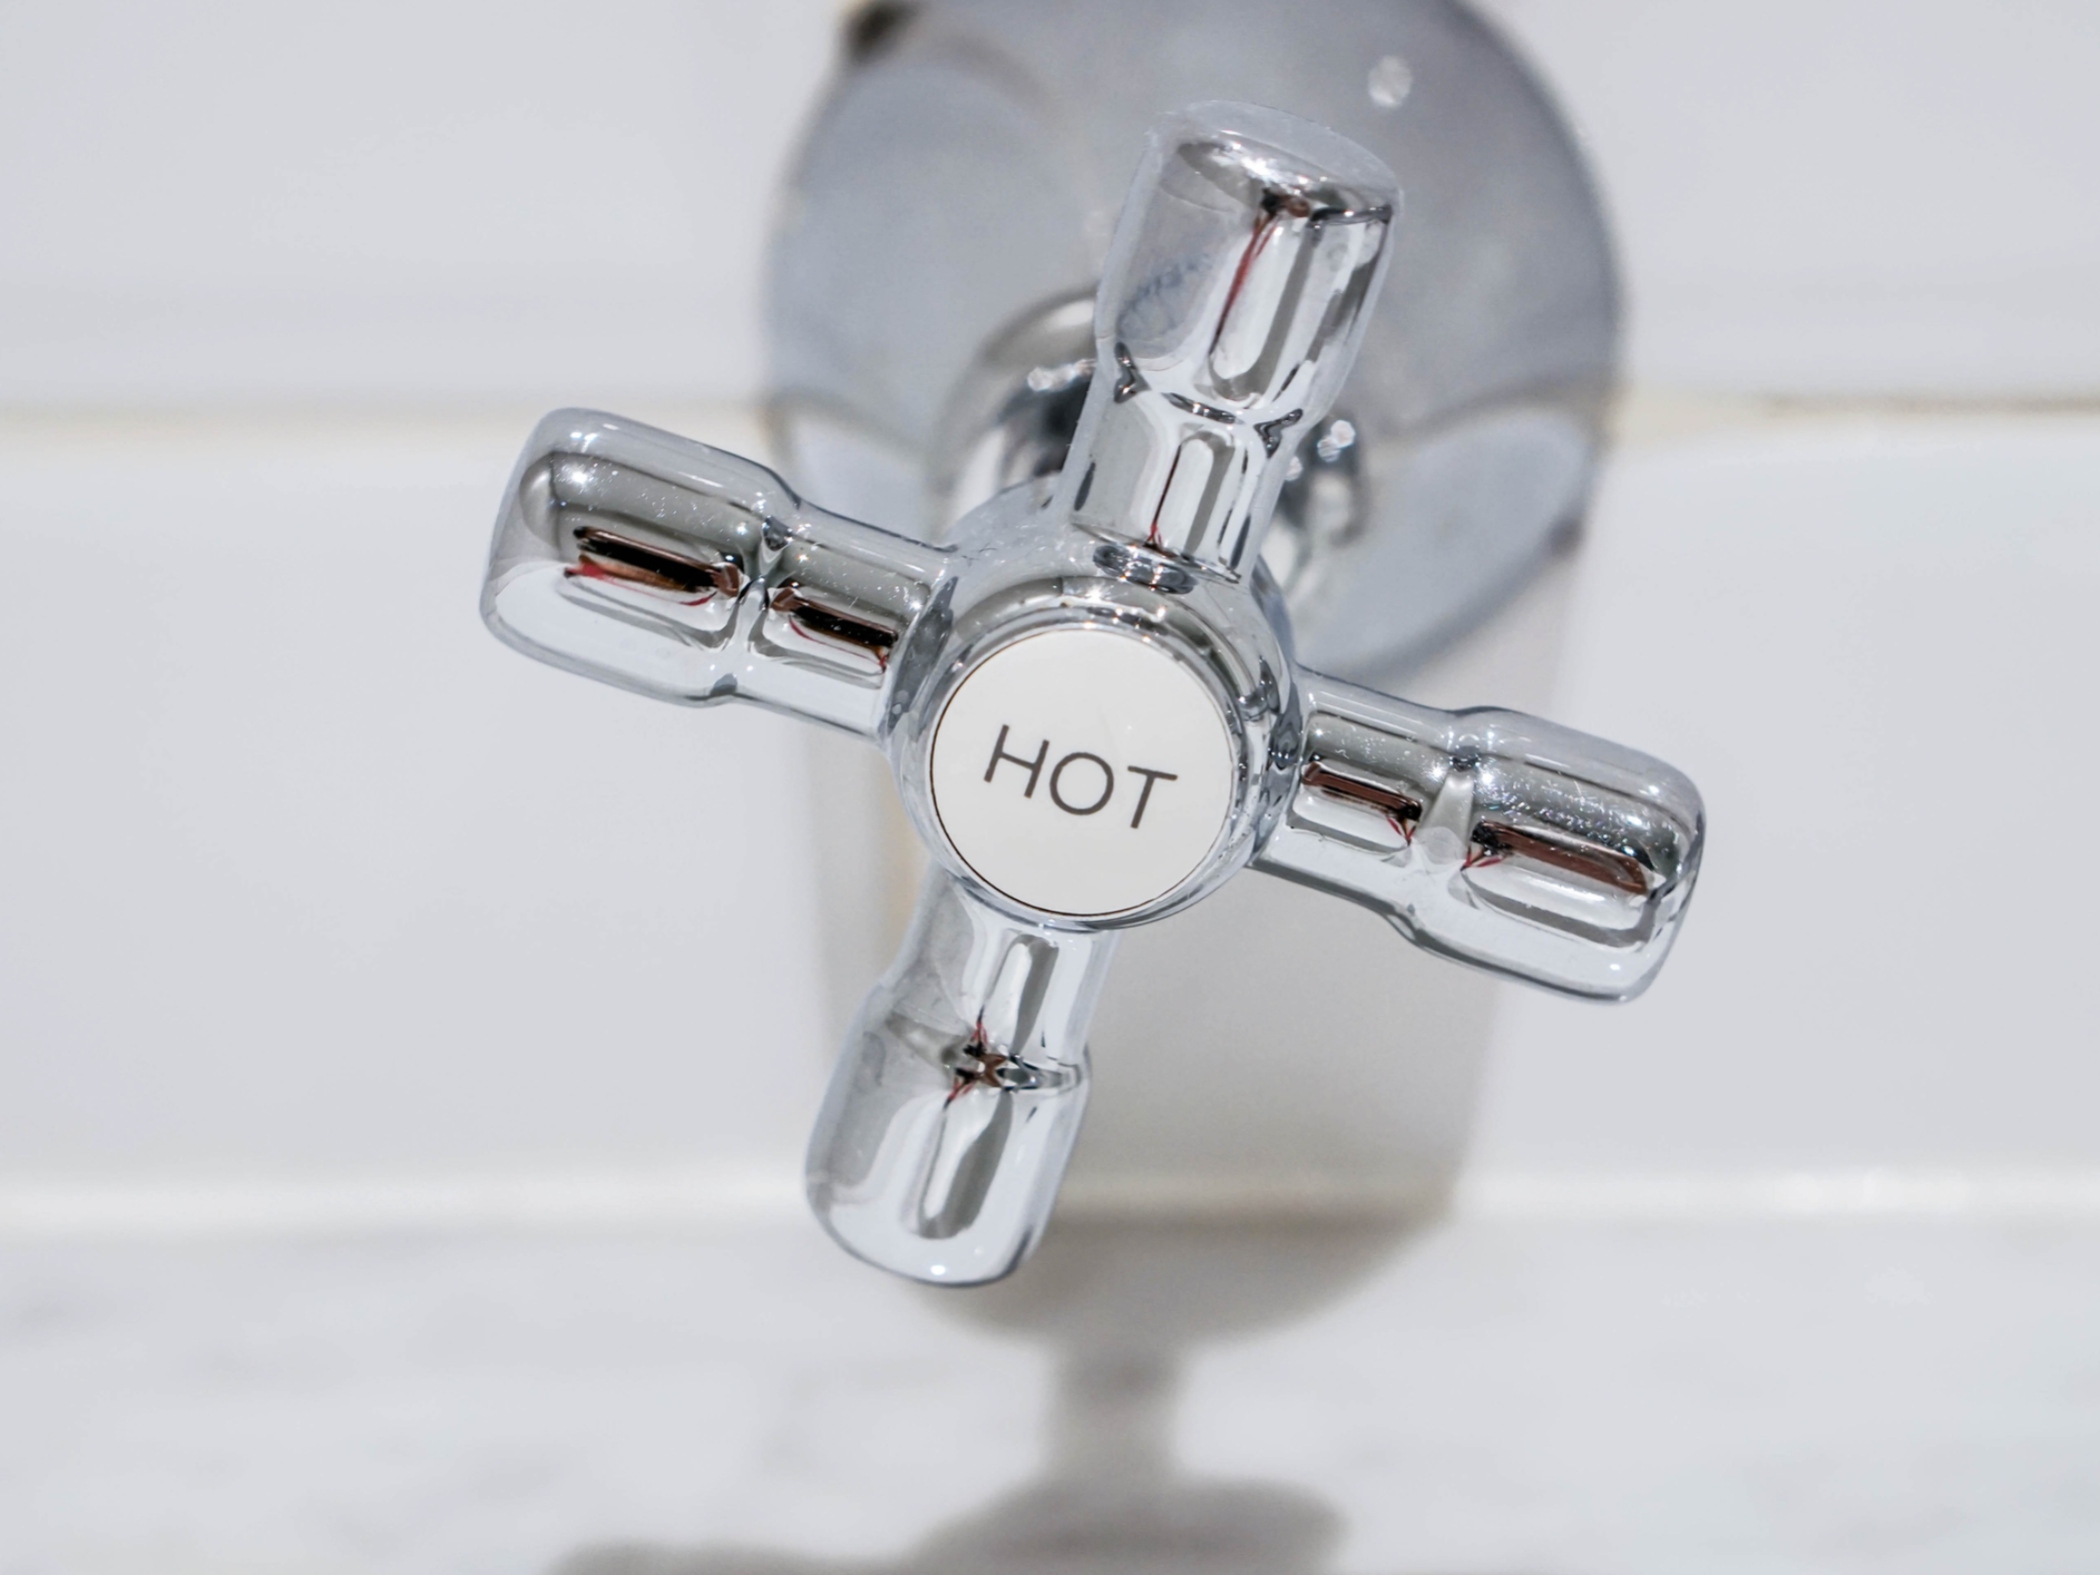 Hot water valve on faucet